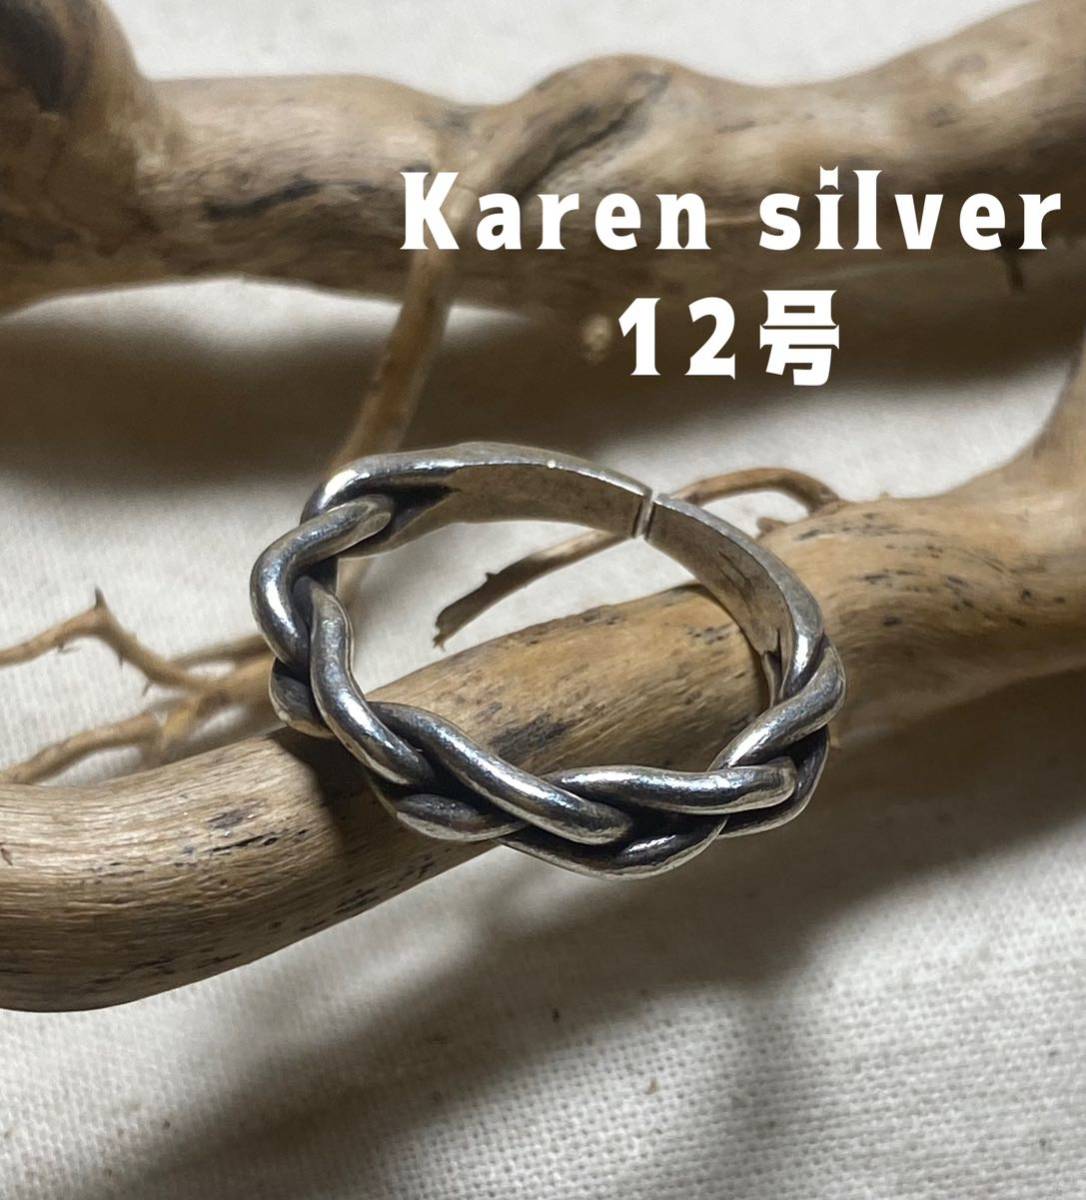 R59t-37 4B and braid Karen Silver Handmade Handmade Knot Chain and Ring Knot Twist No. 12 and 3, ring, Silver, Under size 13